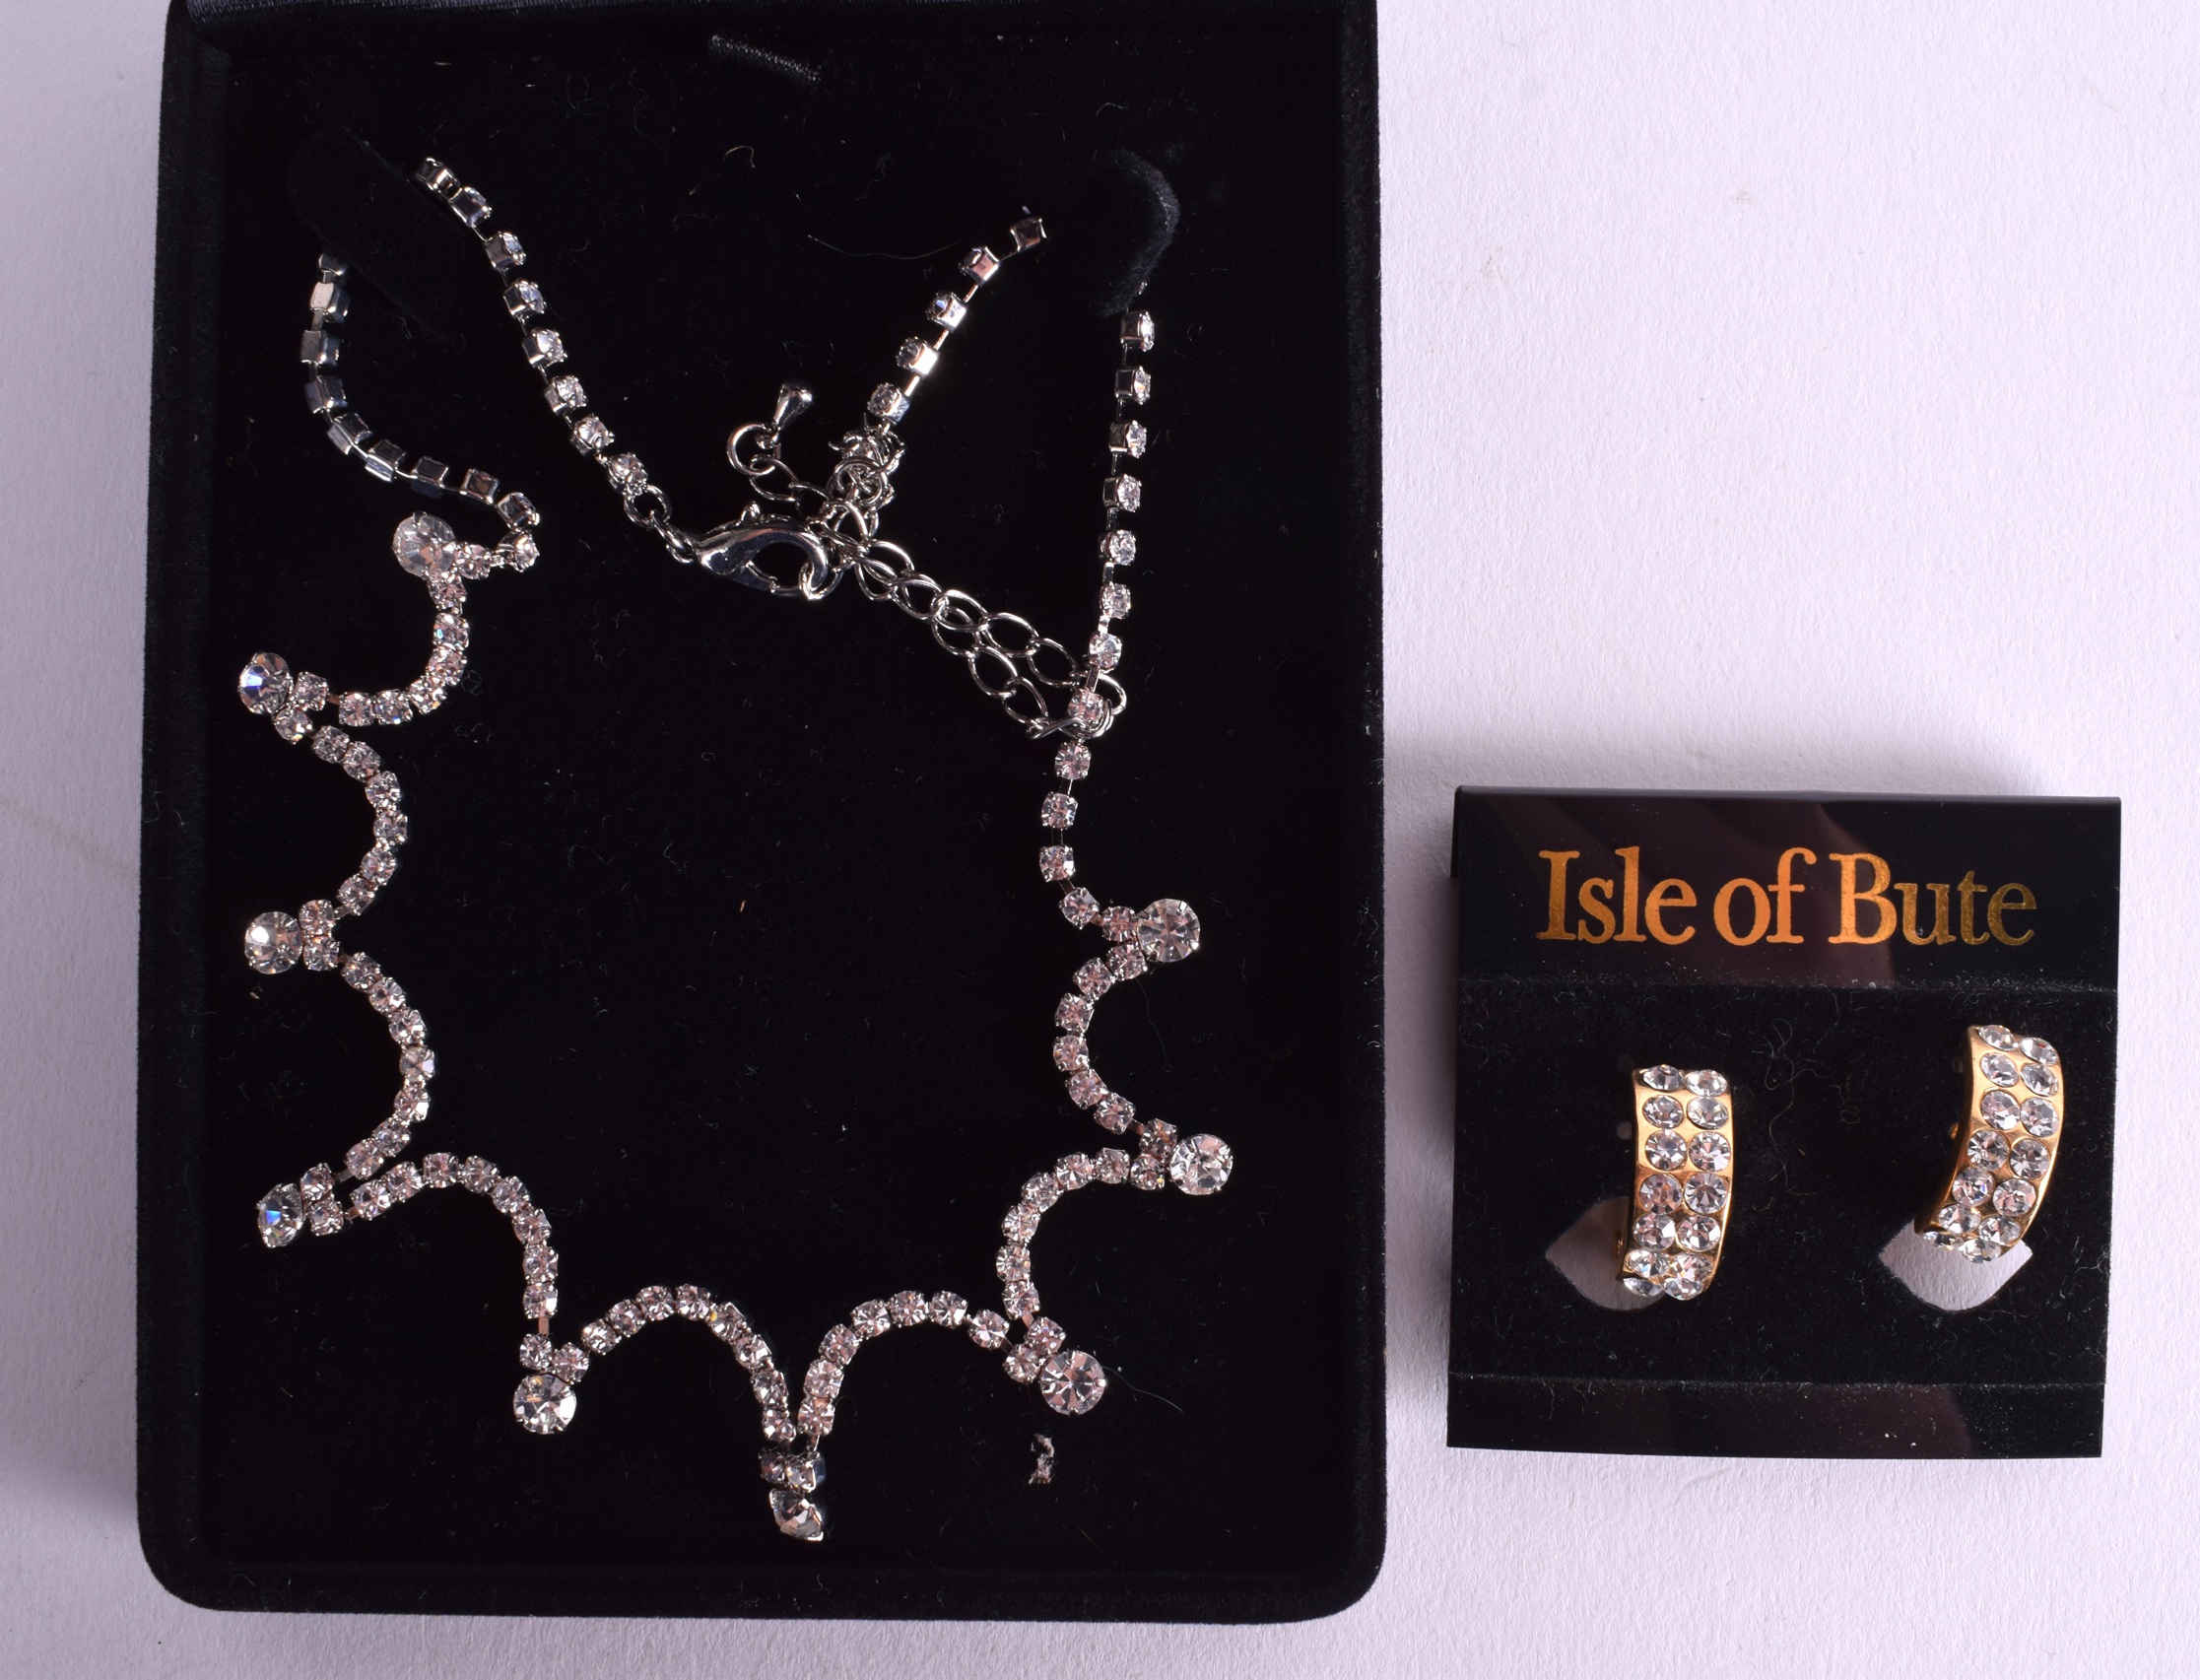 AN ISLE OF BUTE COLLECTION NECKLACE with matching earrings. (3) - Image 2 of 2